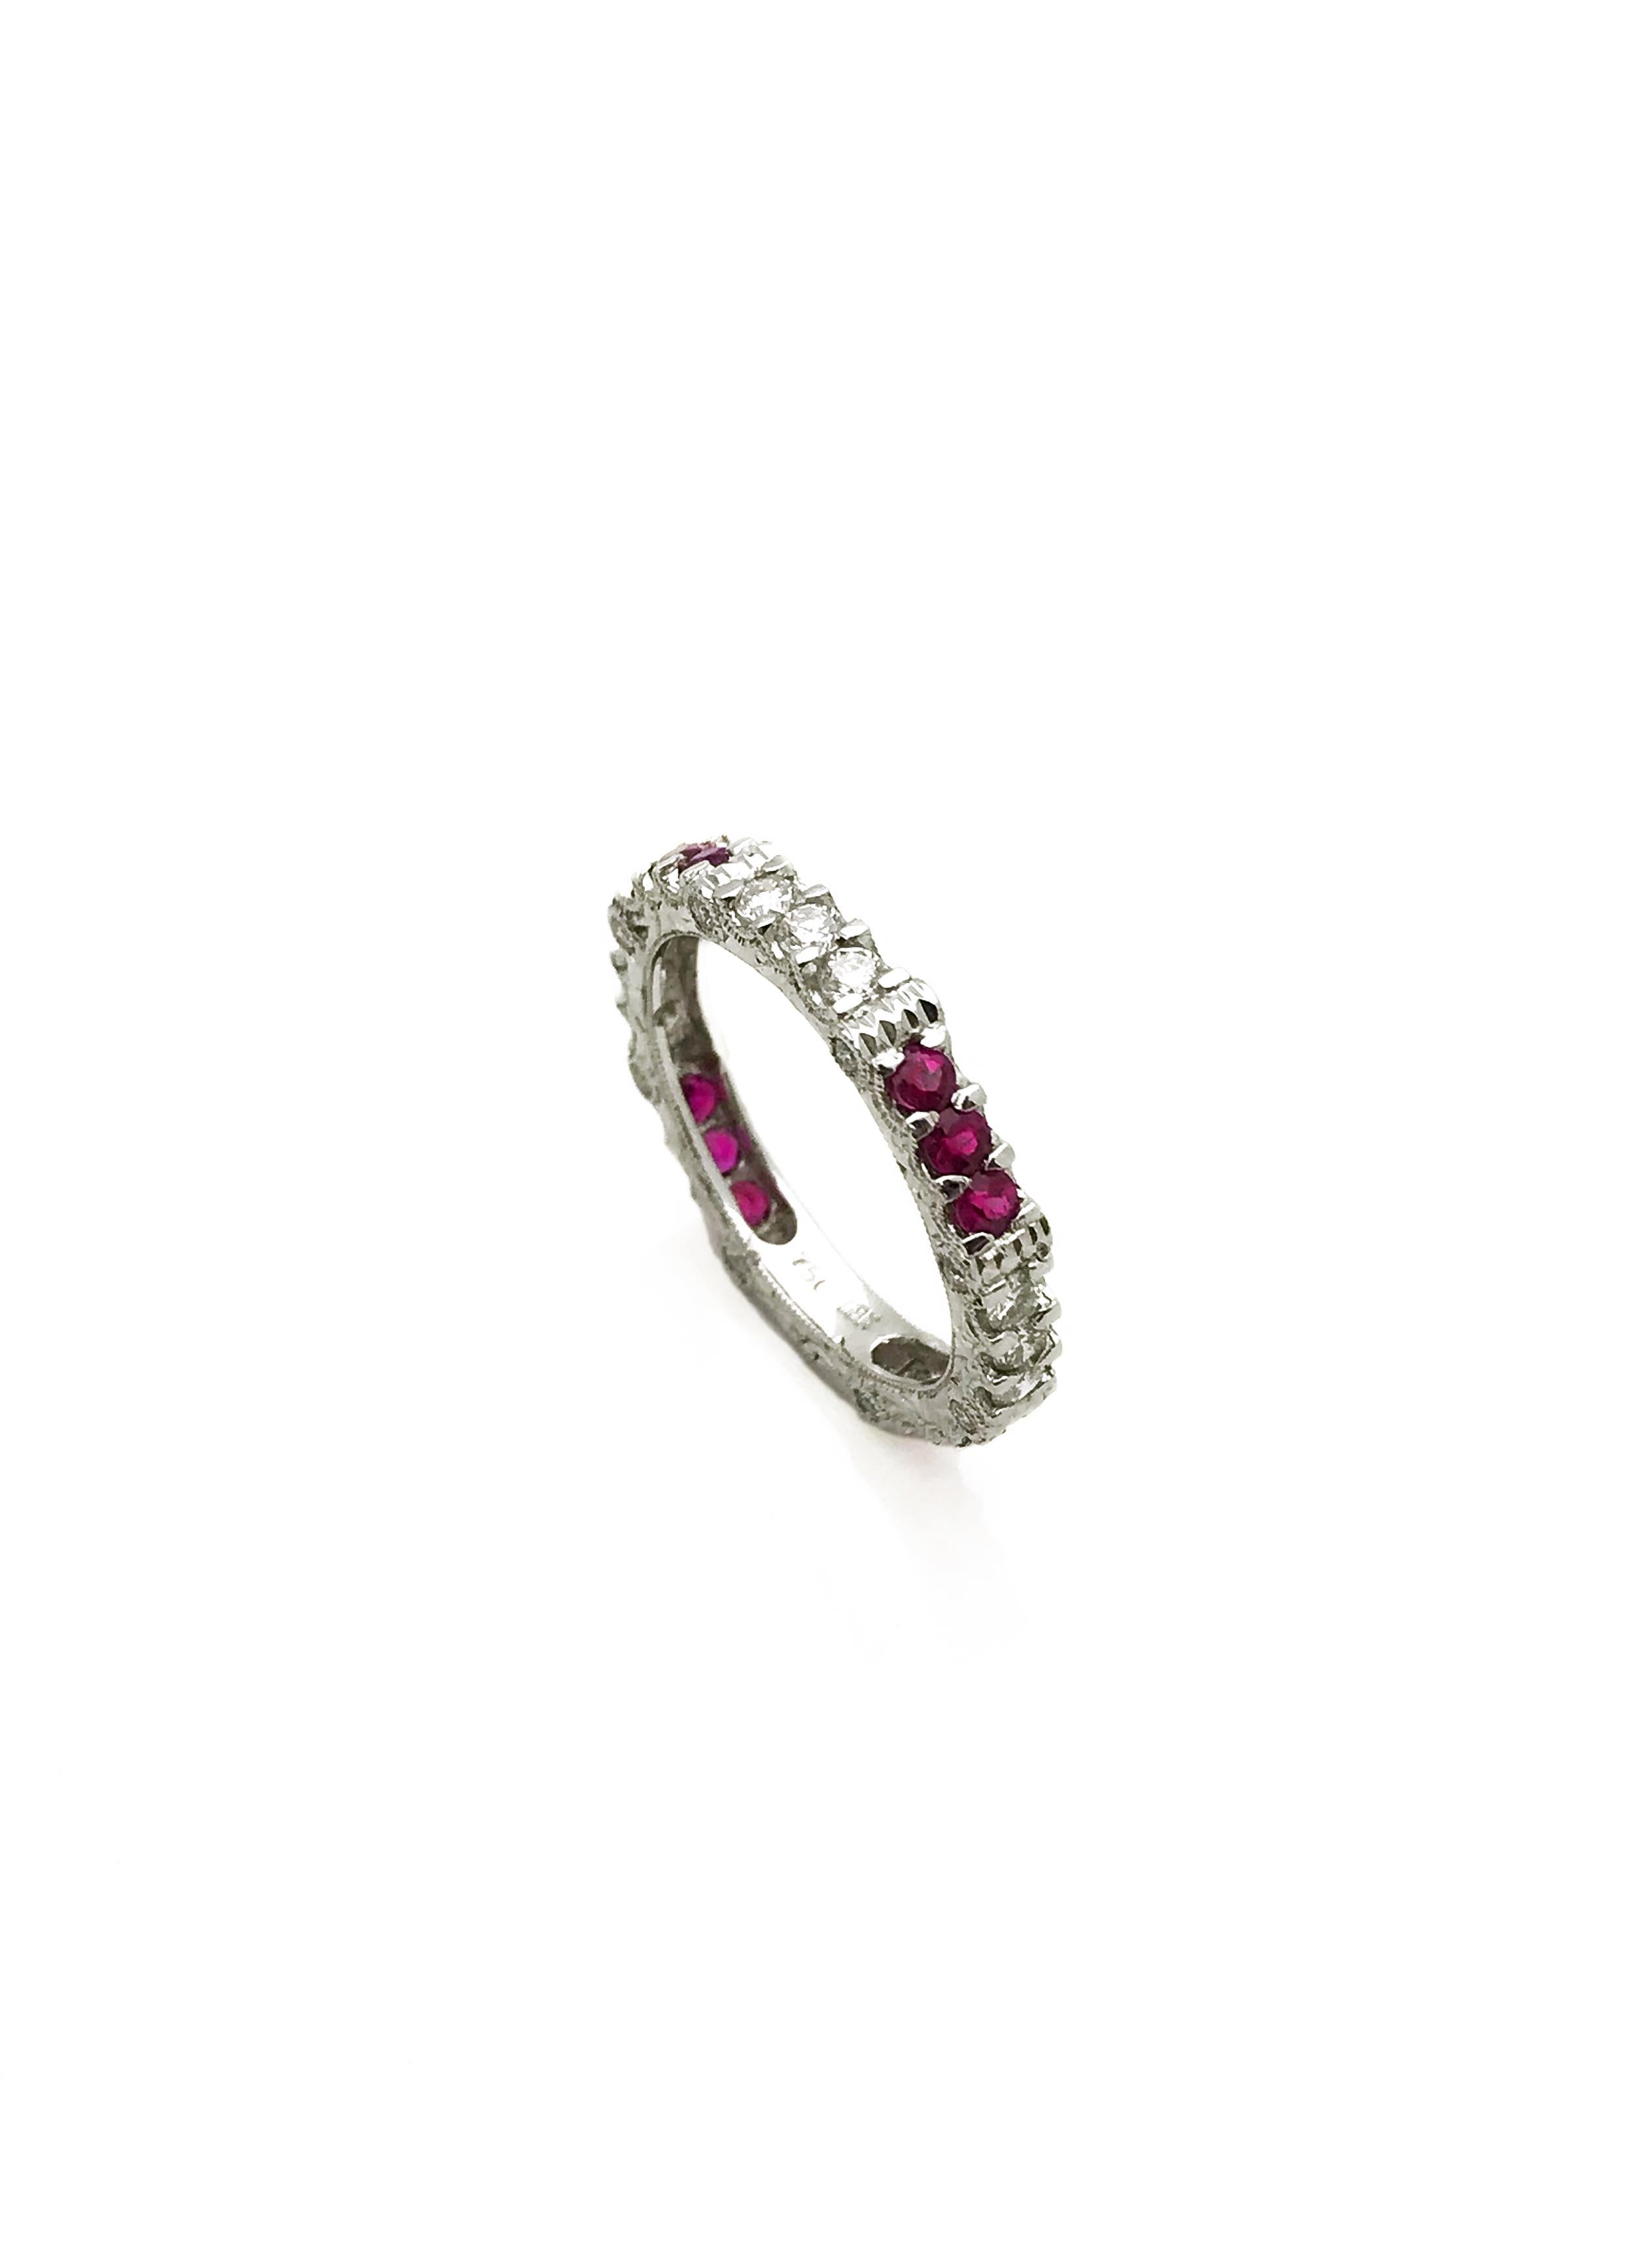 Round Cut Ruby Diamond Eternity Band Ring, 18k White Gold For Sale